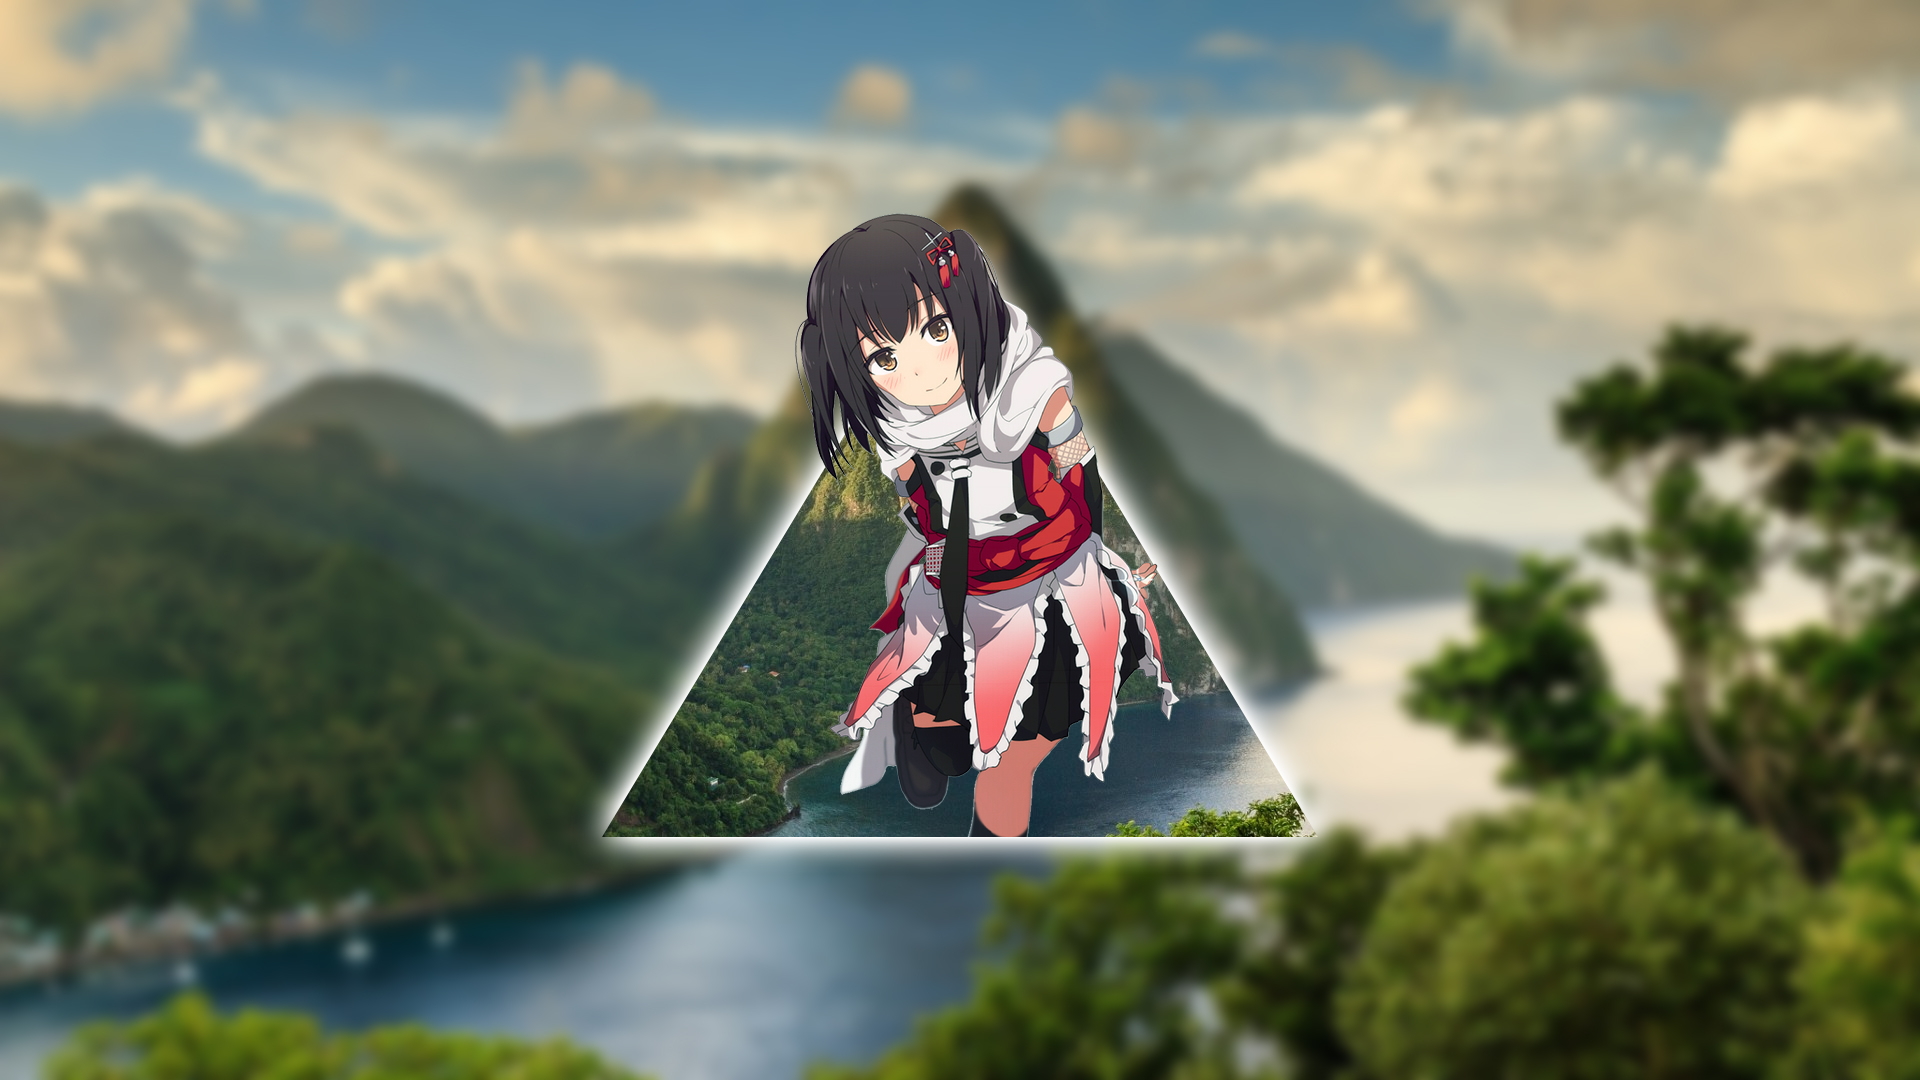 Anime 1920x1080 anime anime girls picture-in-picture Kantai Collection St. Lucia Caribbean dark hair triangle looking at viewer digital art smiling photo manipulation sky clouds water trees closed mouth blushing Sendai (KanColle) uniform scarf